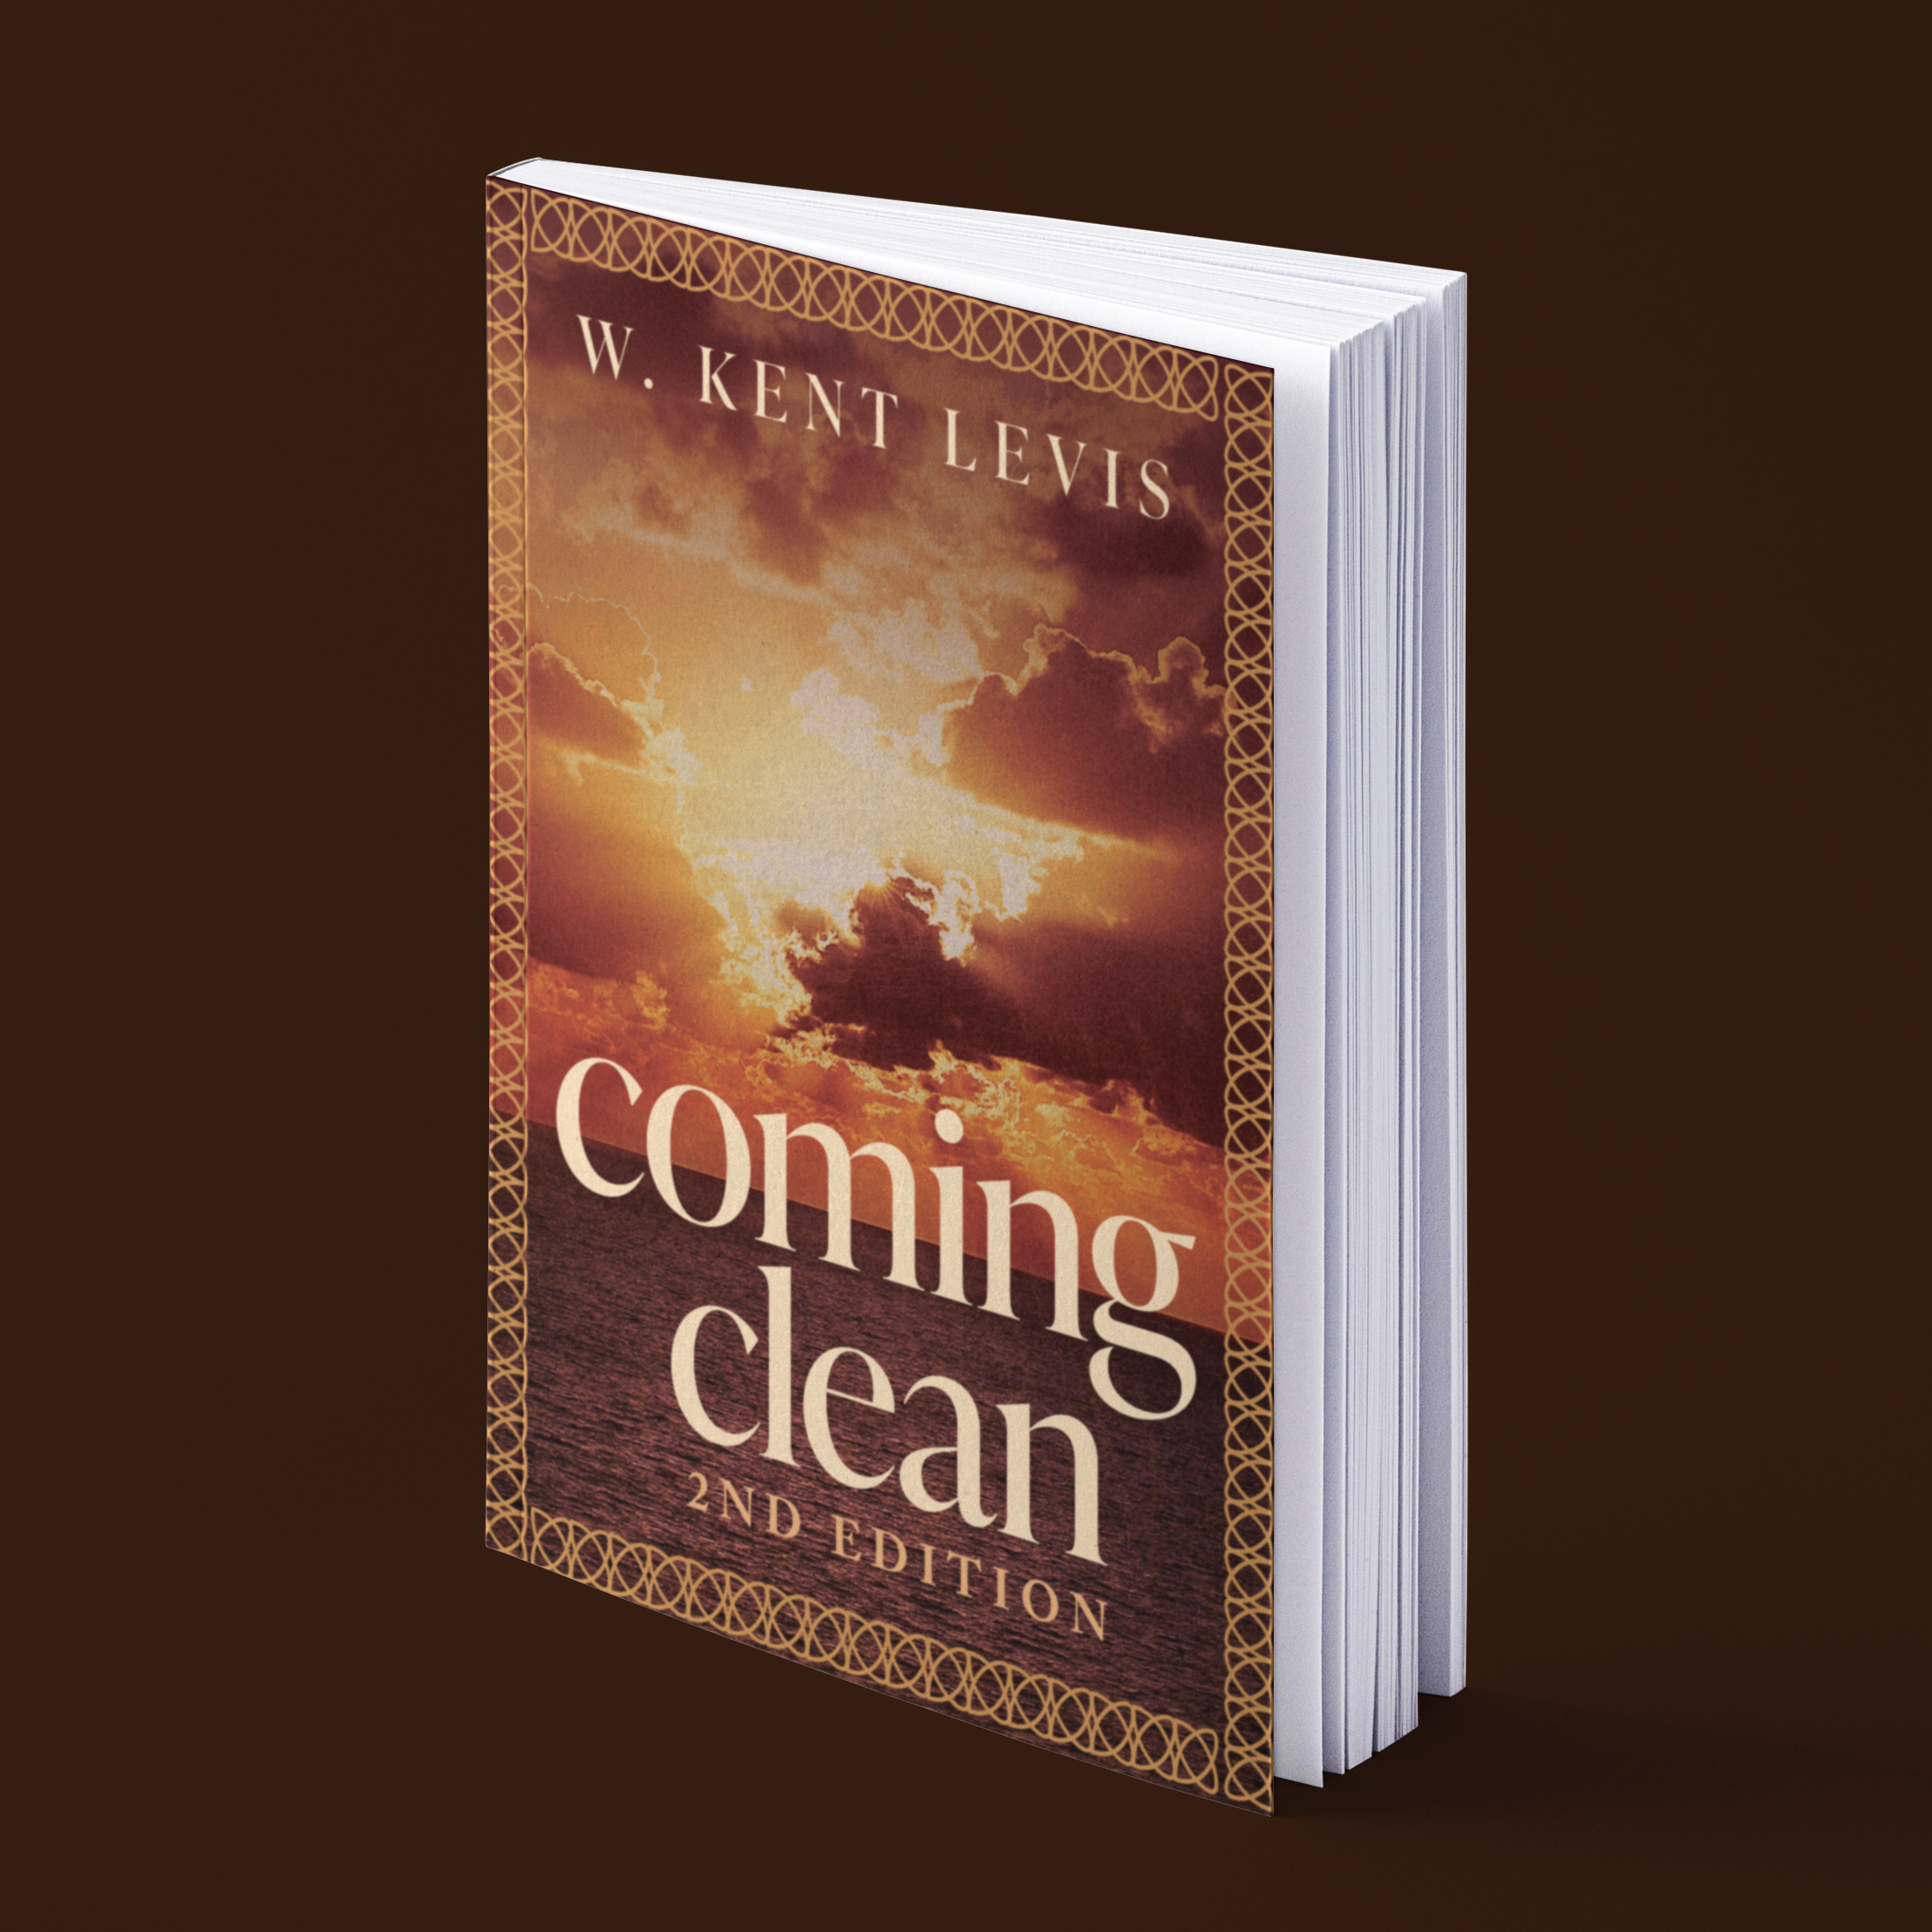 Christian Author Documents the Path to Victory Over Pornography in New Book, "Coming Clean"